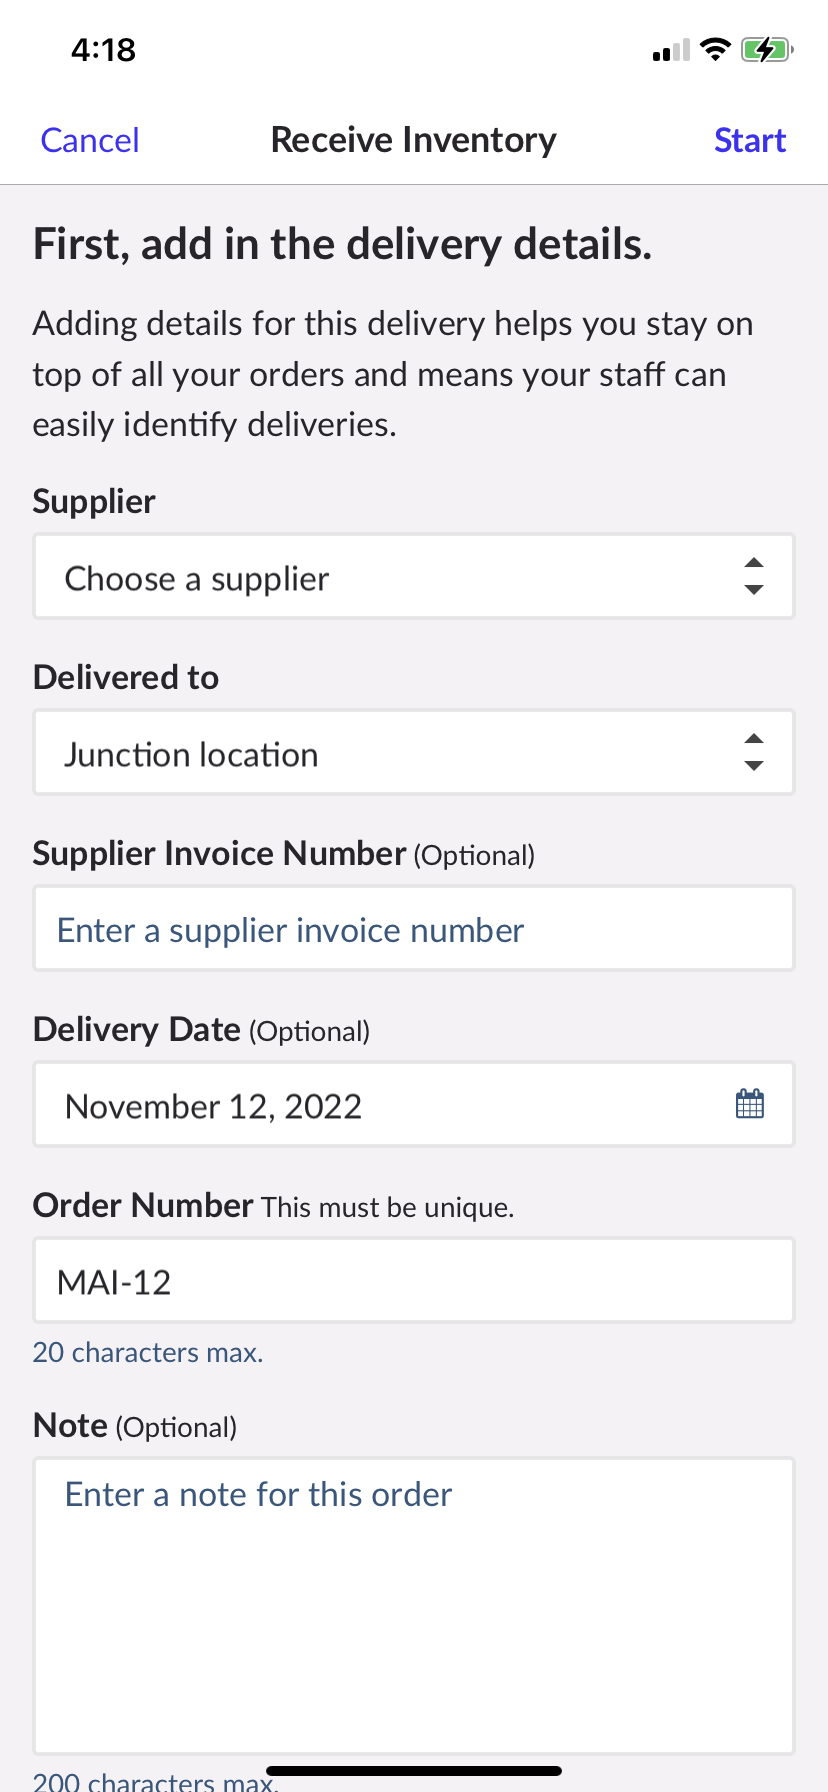 Page showing the details of a new stock order with fields to fill in information.